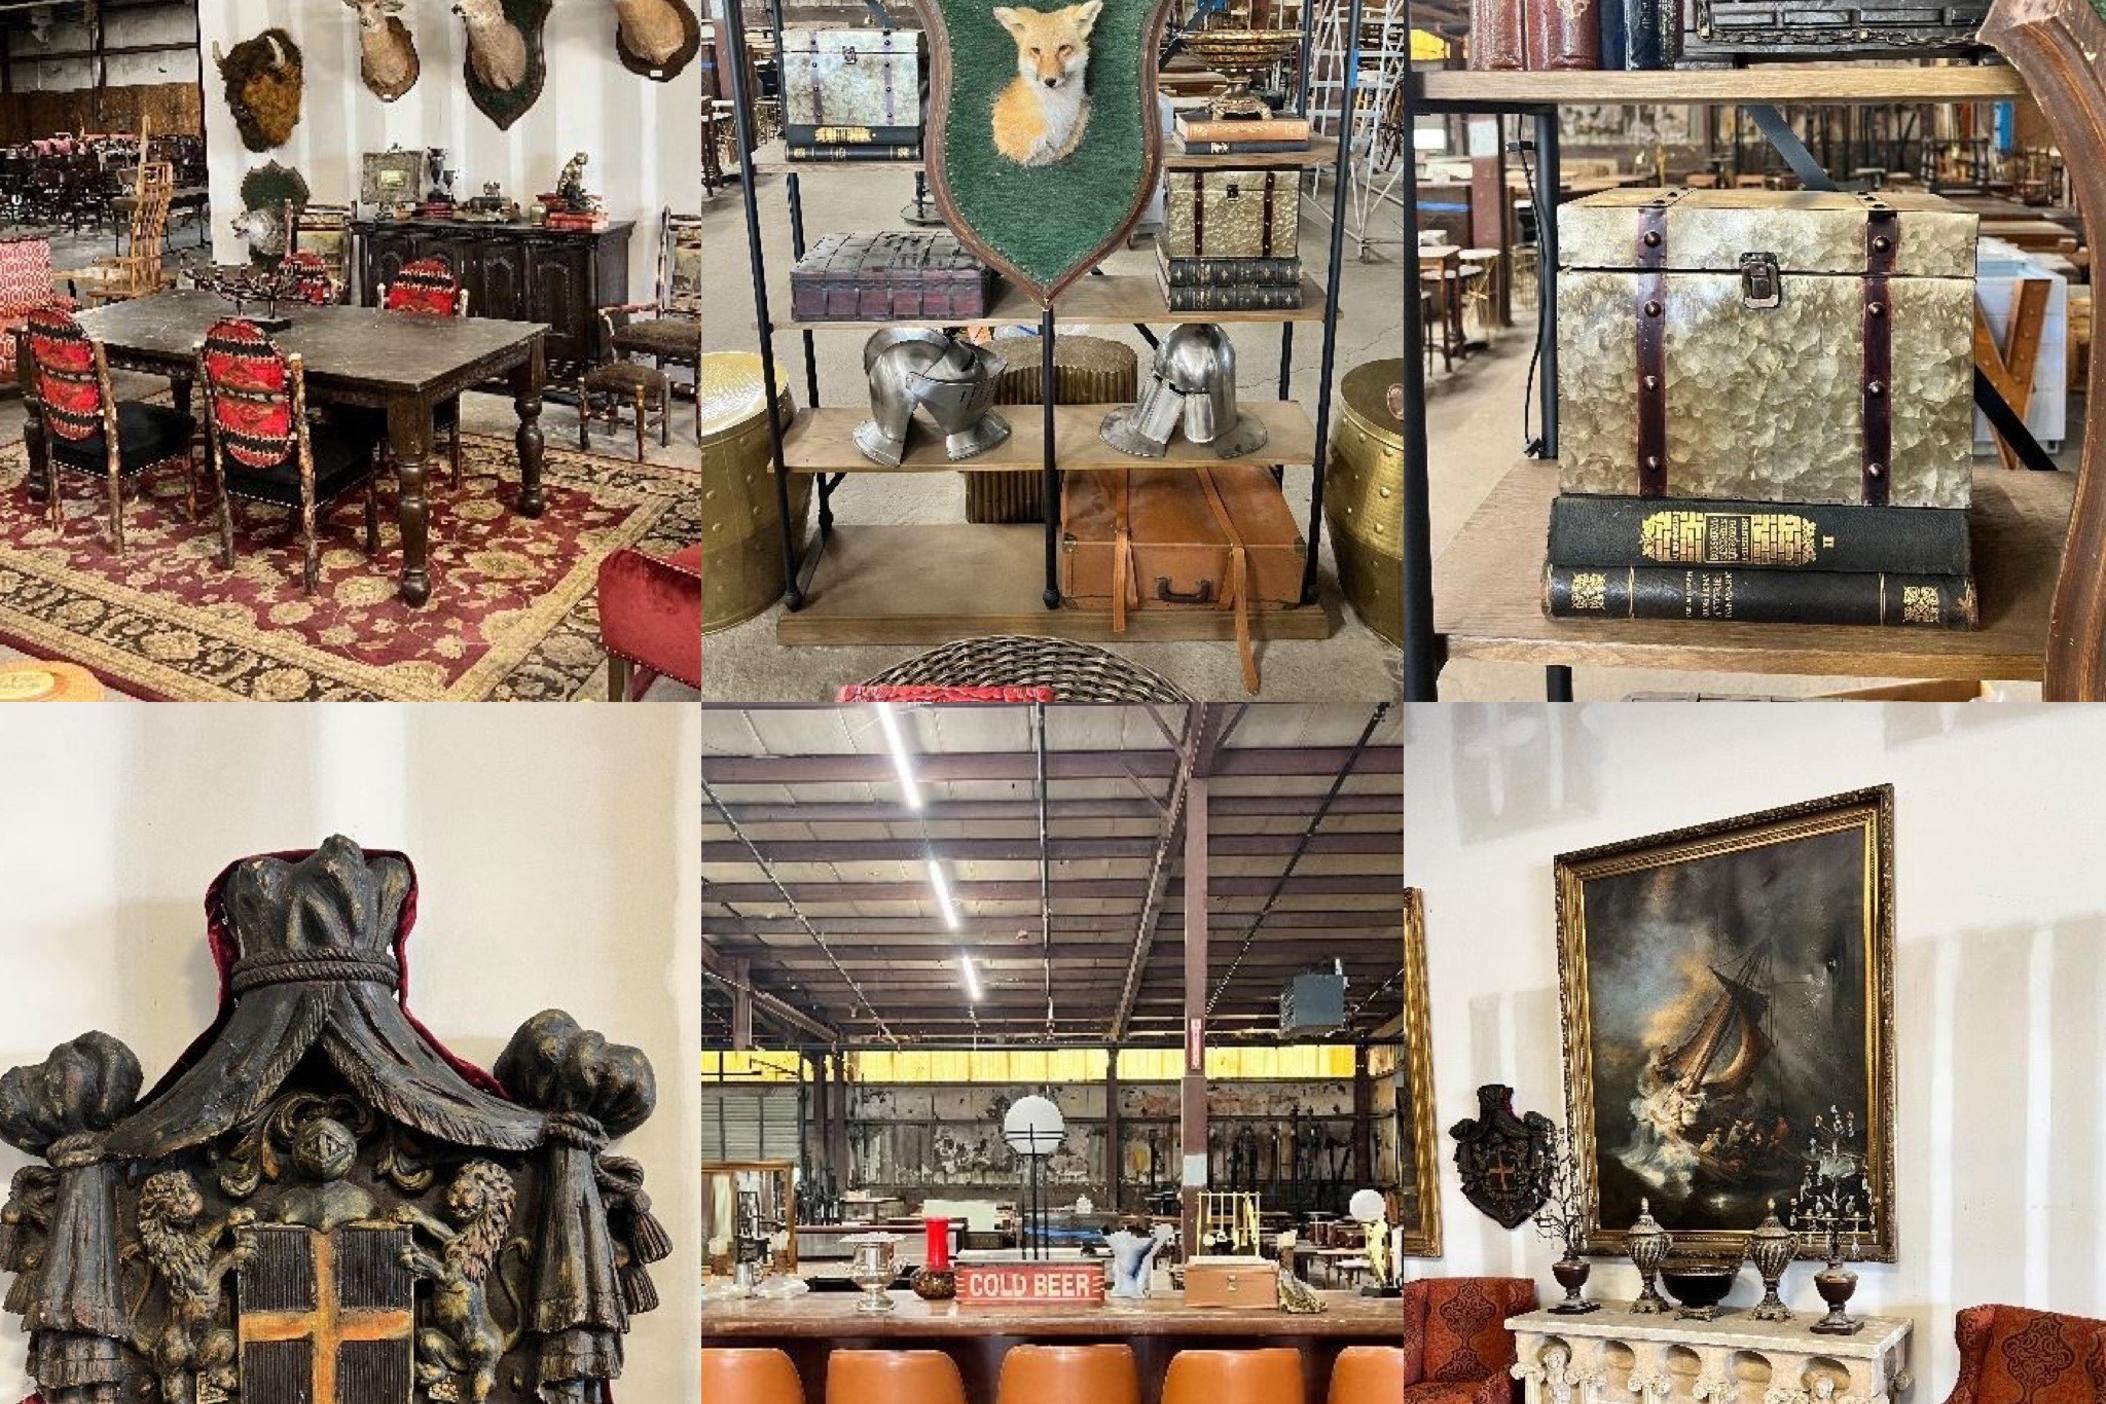 An Atlanta company's liquidation sale of furniture and decor from TV studio sets includes items like those used in the 'Vampire Diaries' and its spinoff series.